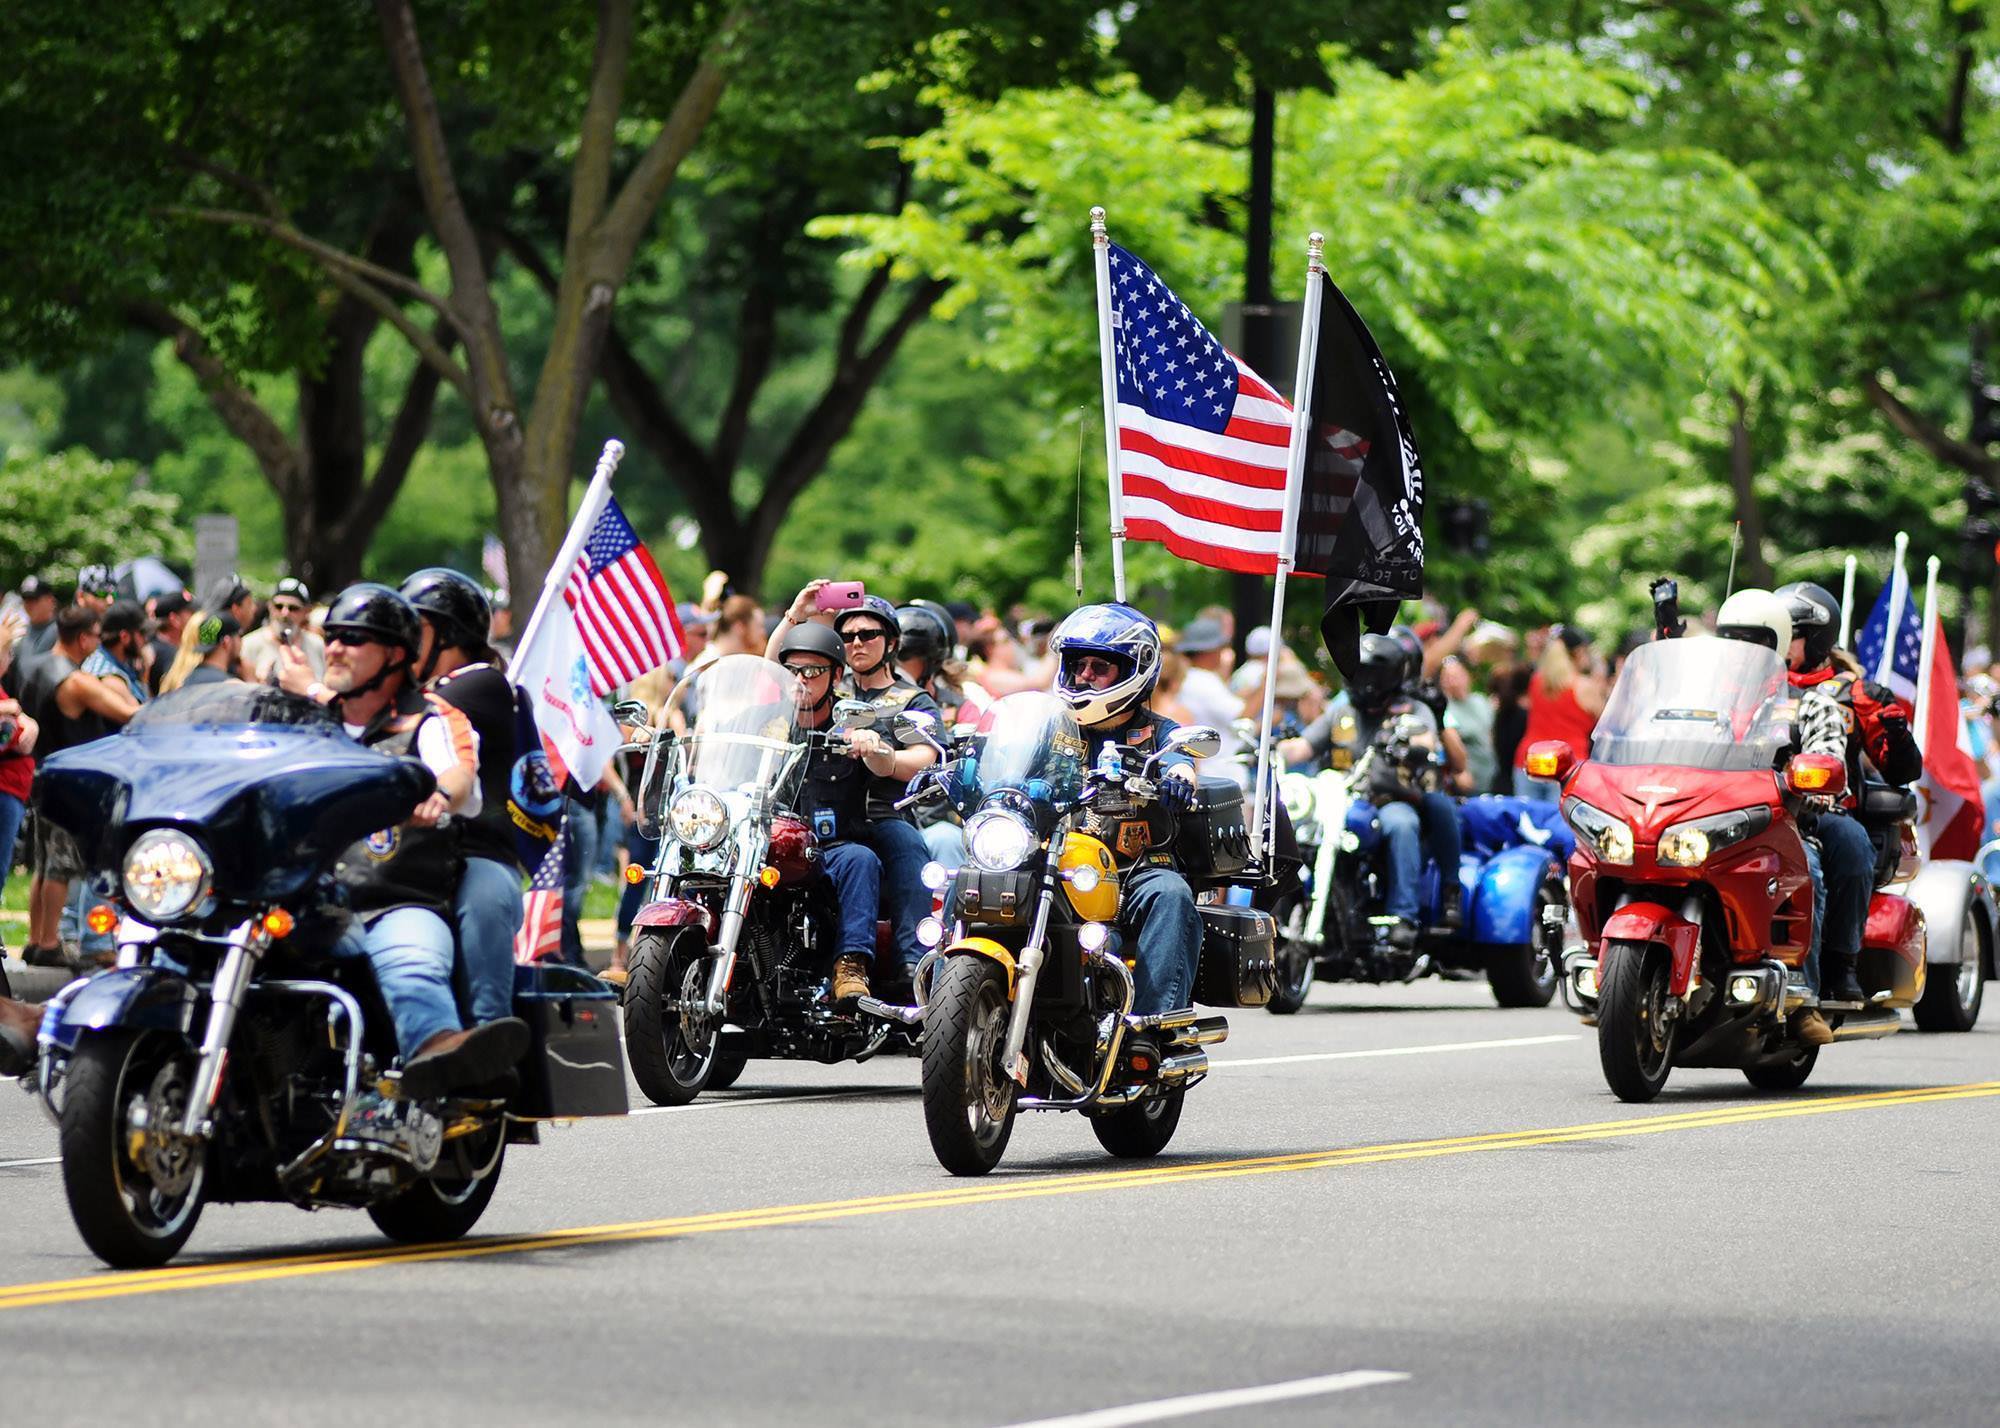 Rolling Thunder motorcycle ride over Memorial Day Weekend